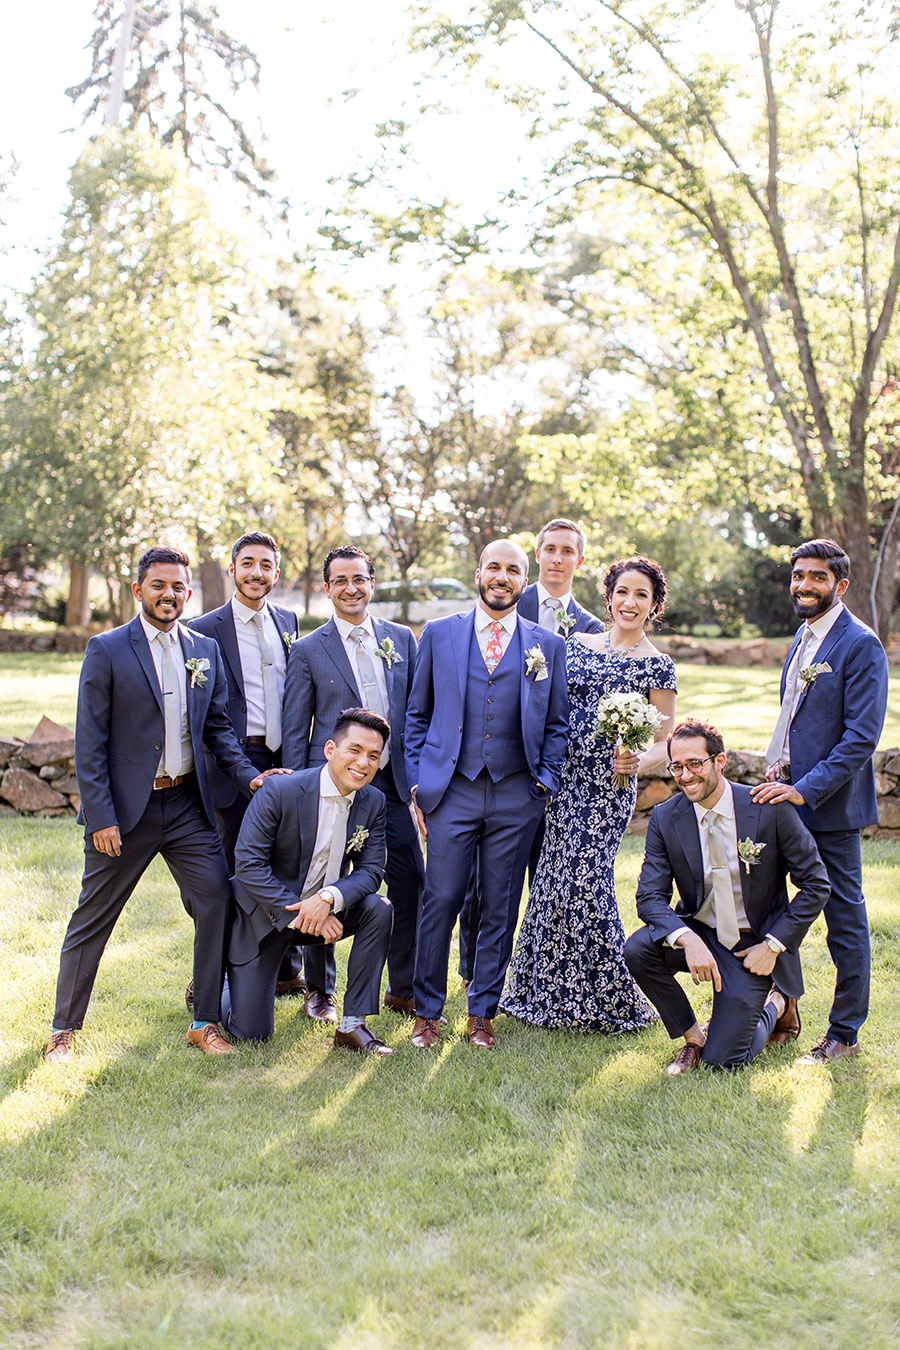 crazy groomsmen pose for a picture